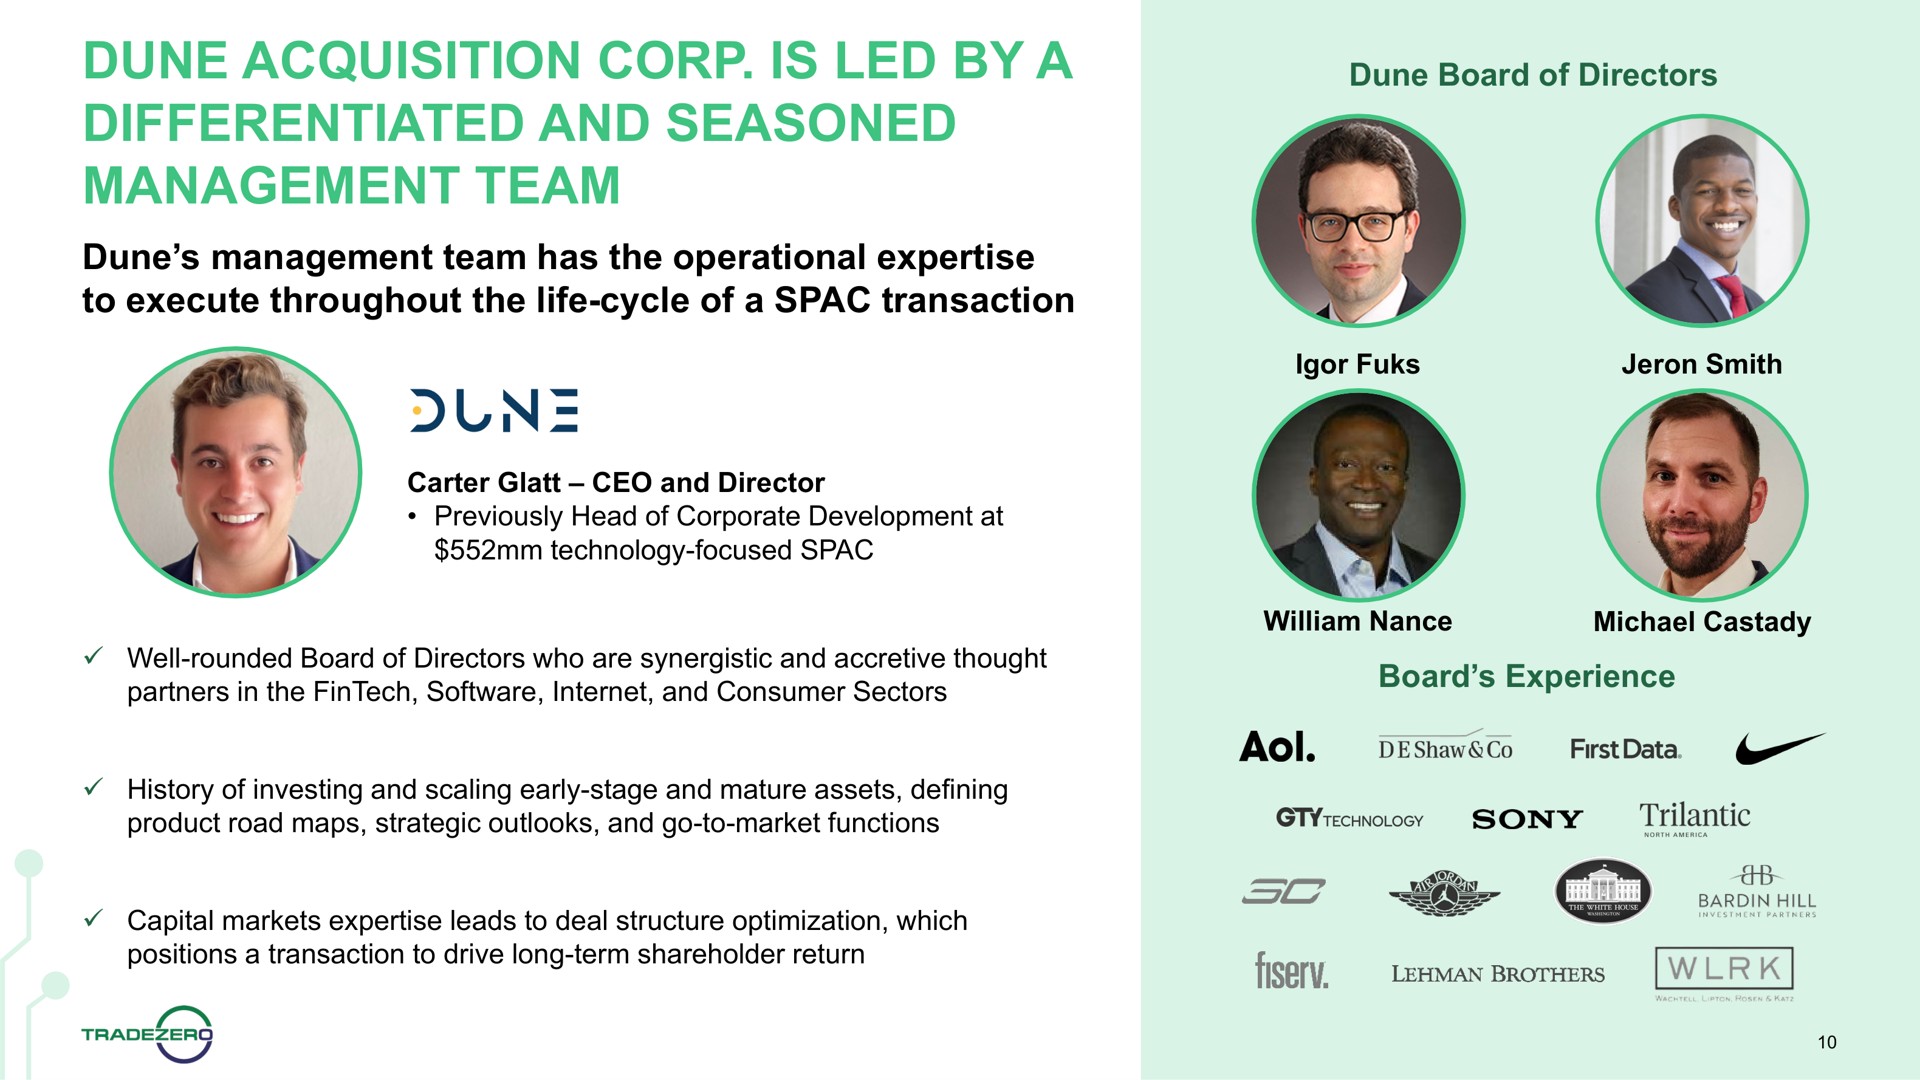 dune acquisition corp is led by a differentiated and seasoned management team | TradeZero